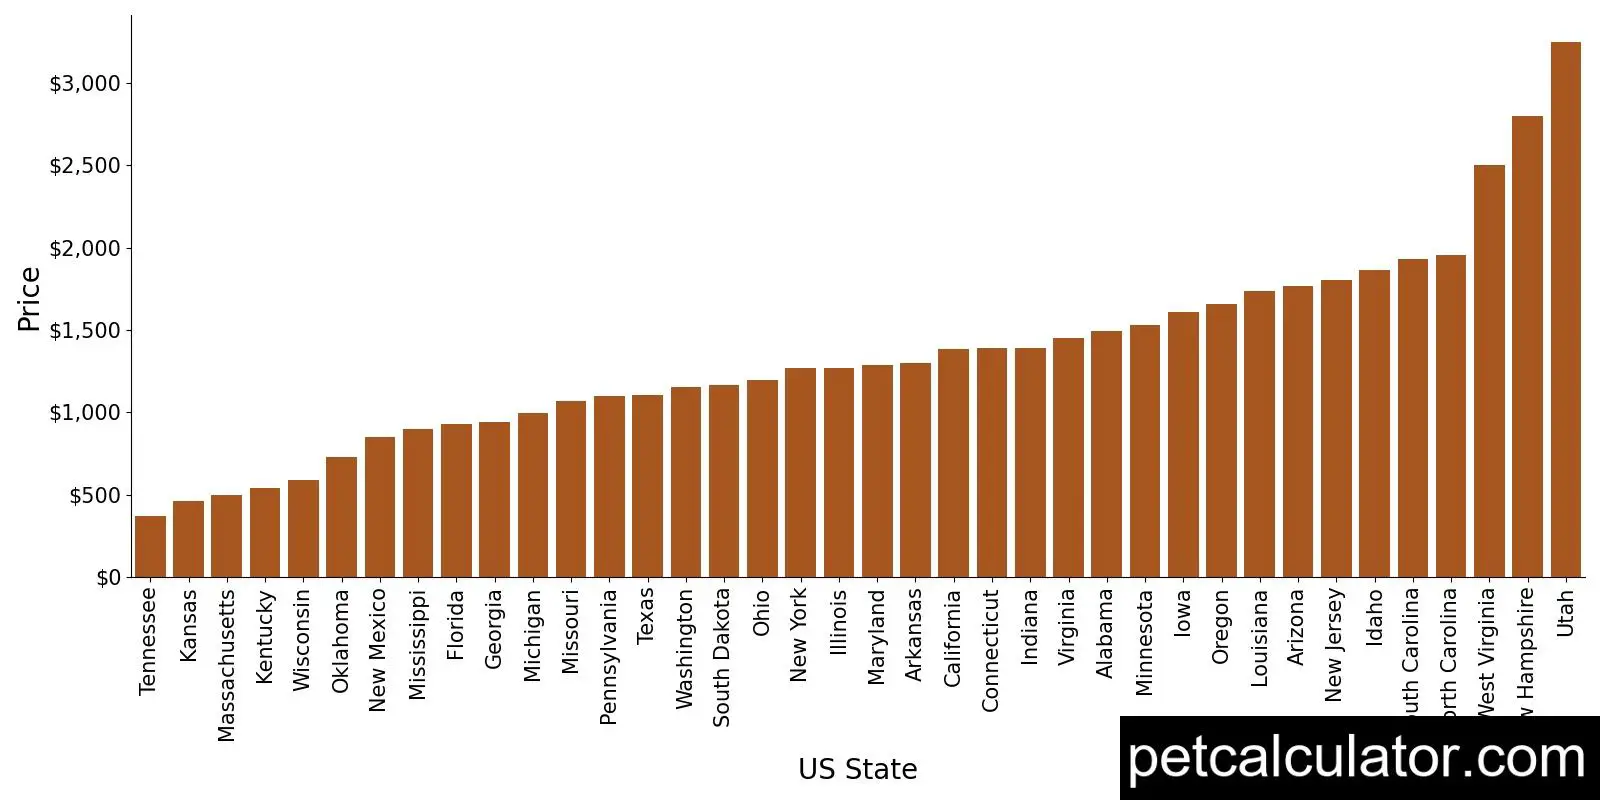 Price of Designer Breed Small by US State 